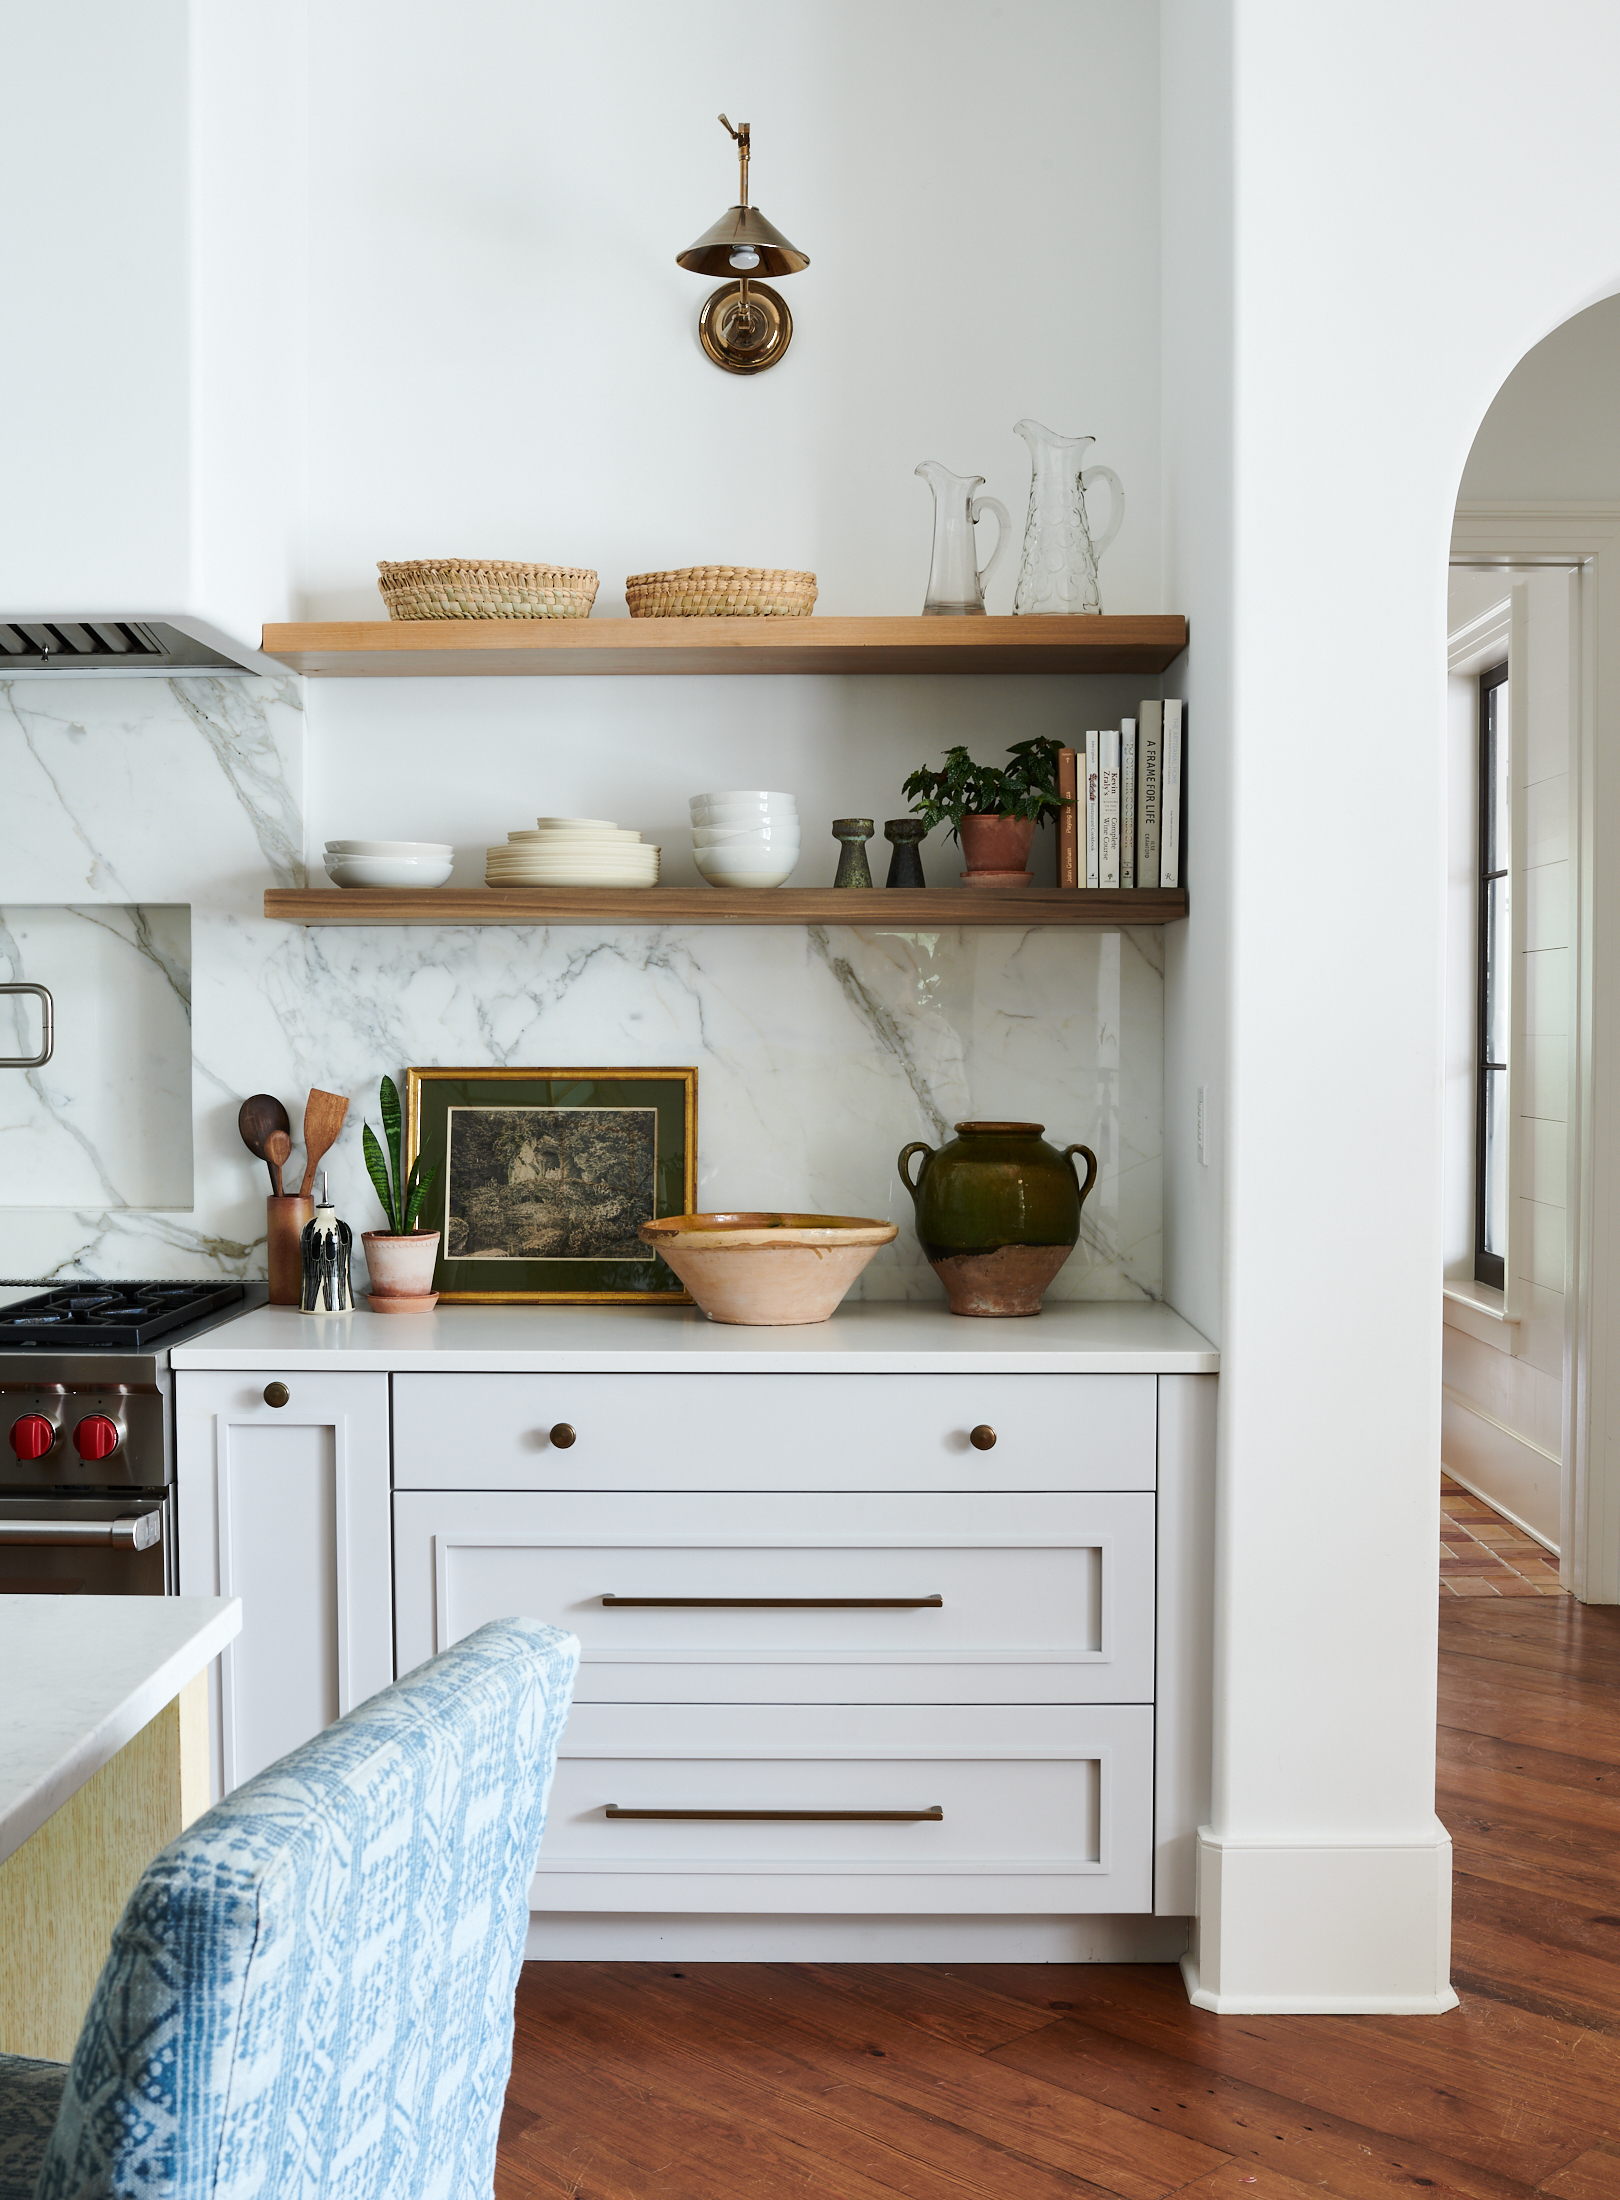 Kitchen Shelves by Alison Gootee Photography for Logan Killen Interiors 